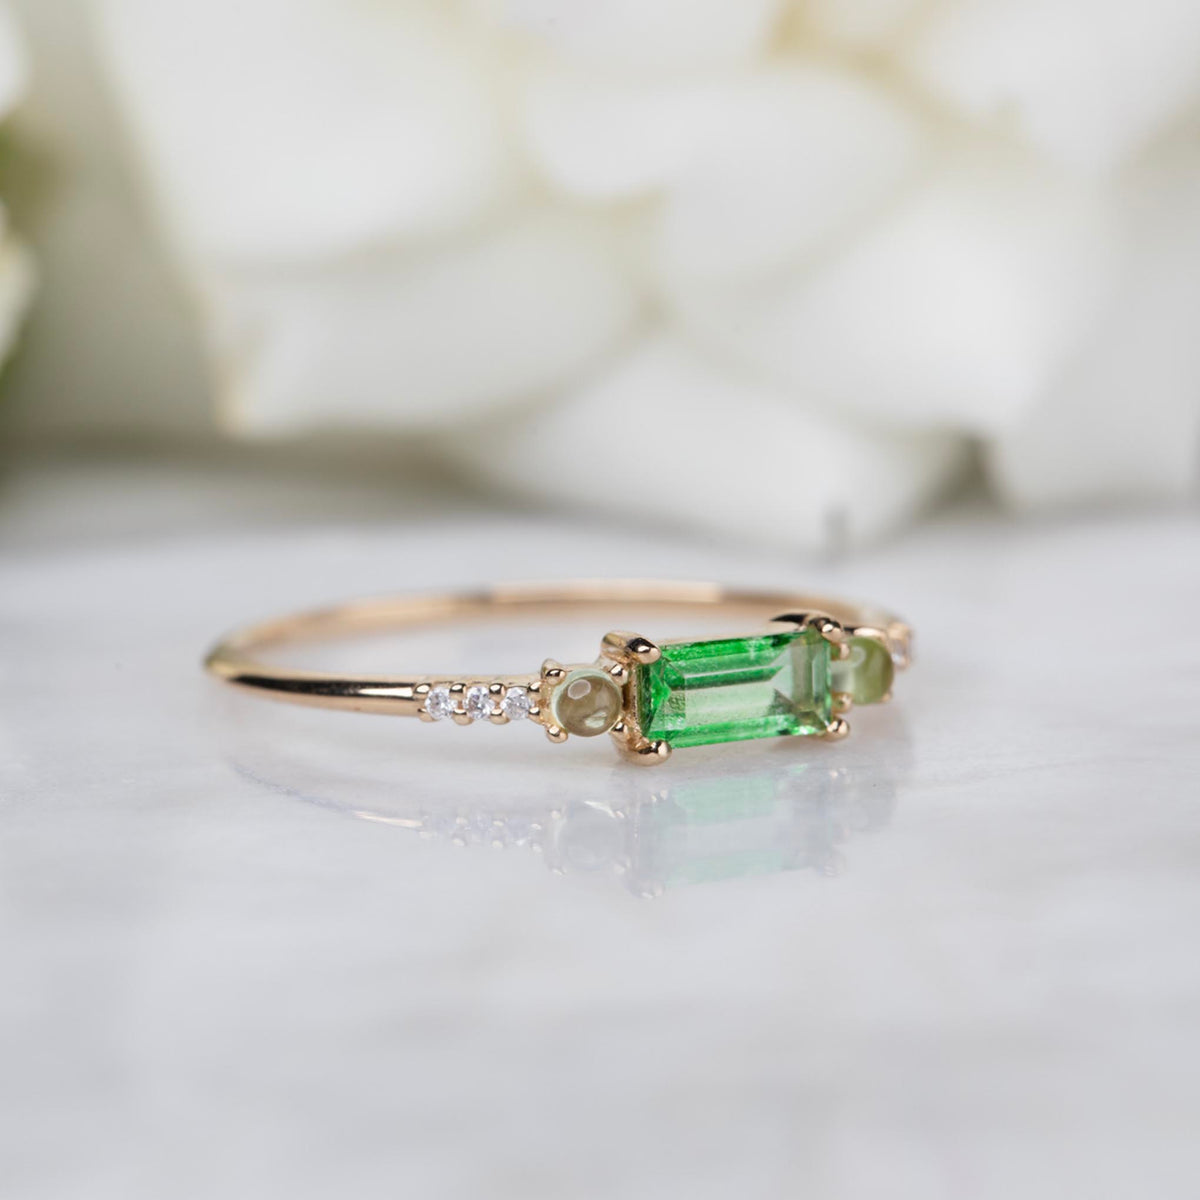 14kt Gold Diamond, Peridot and Green Topaz Belle Ring